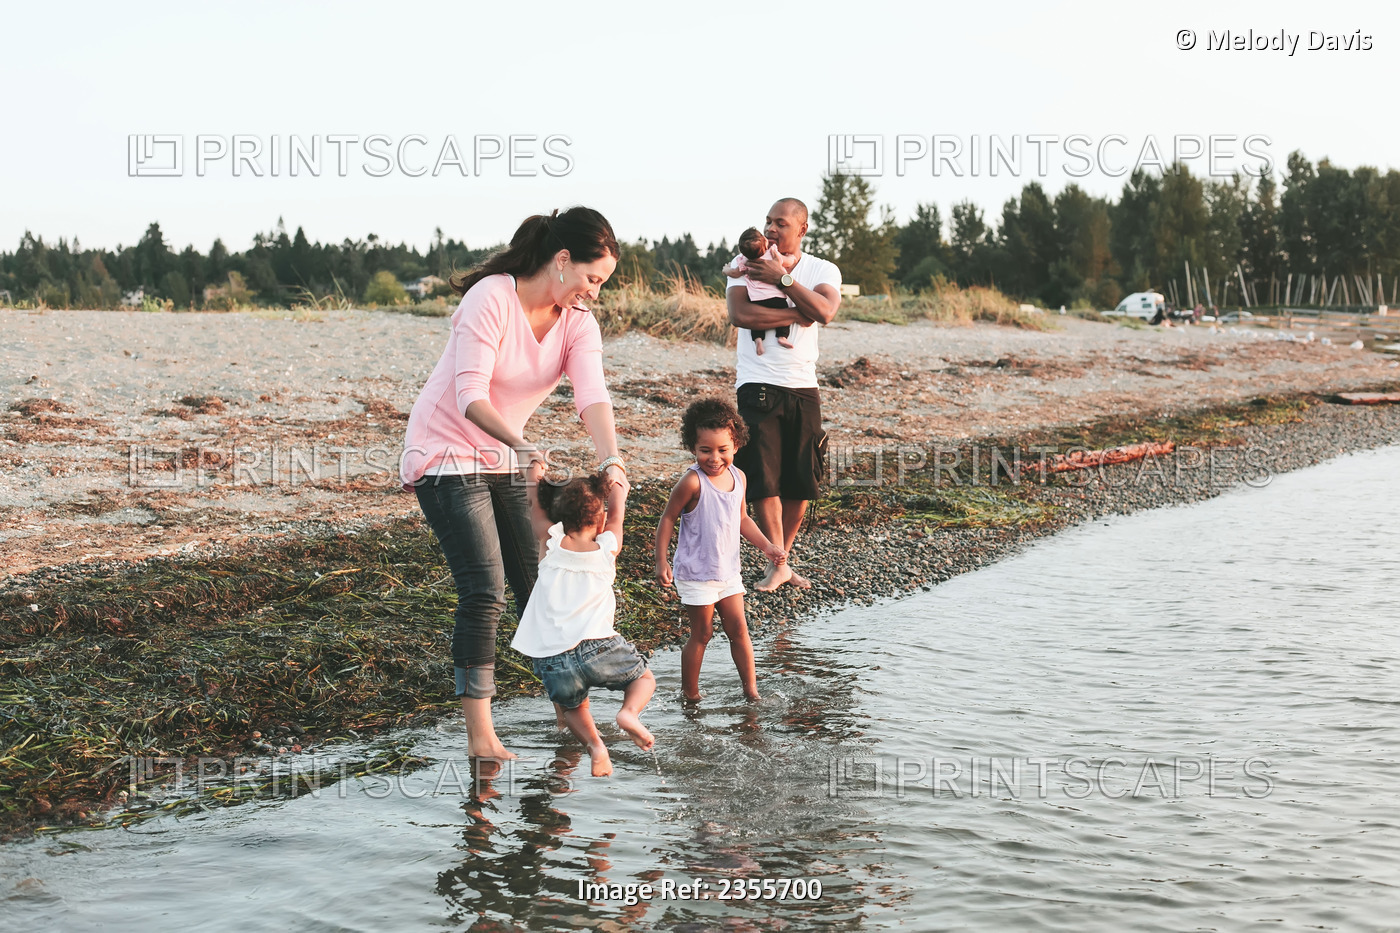 Interracial Family Wading In Water By Beach; British Columbia, Canada